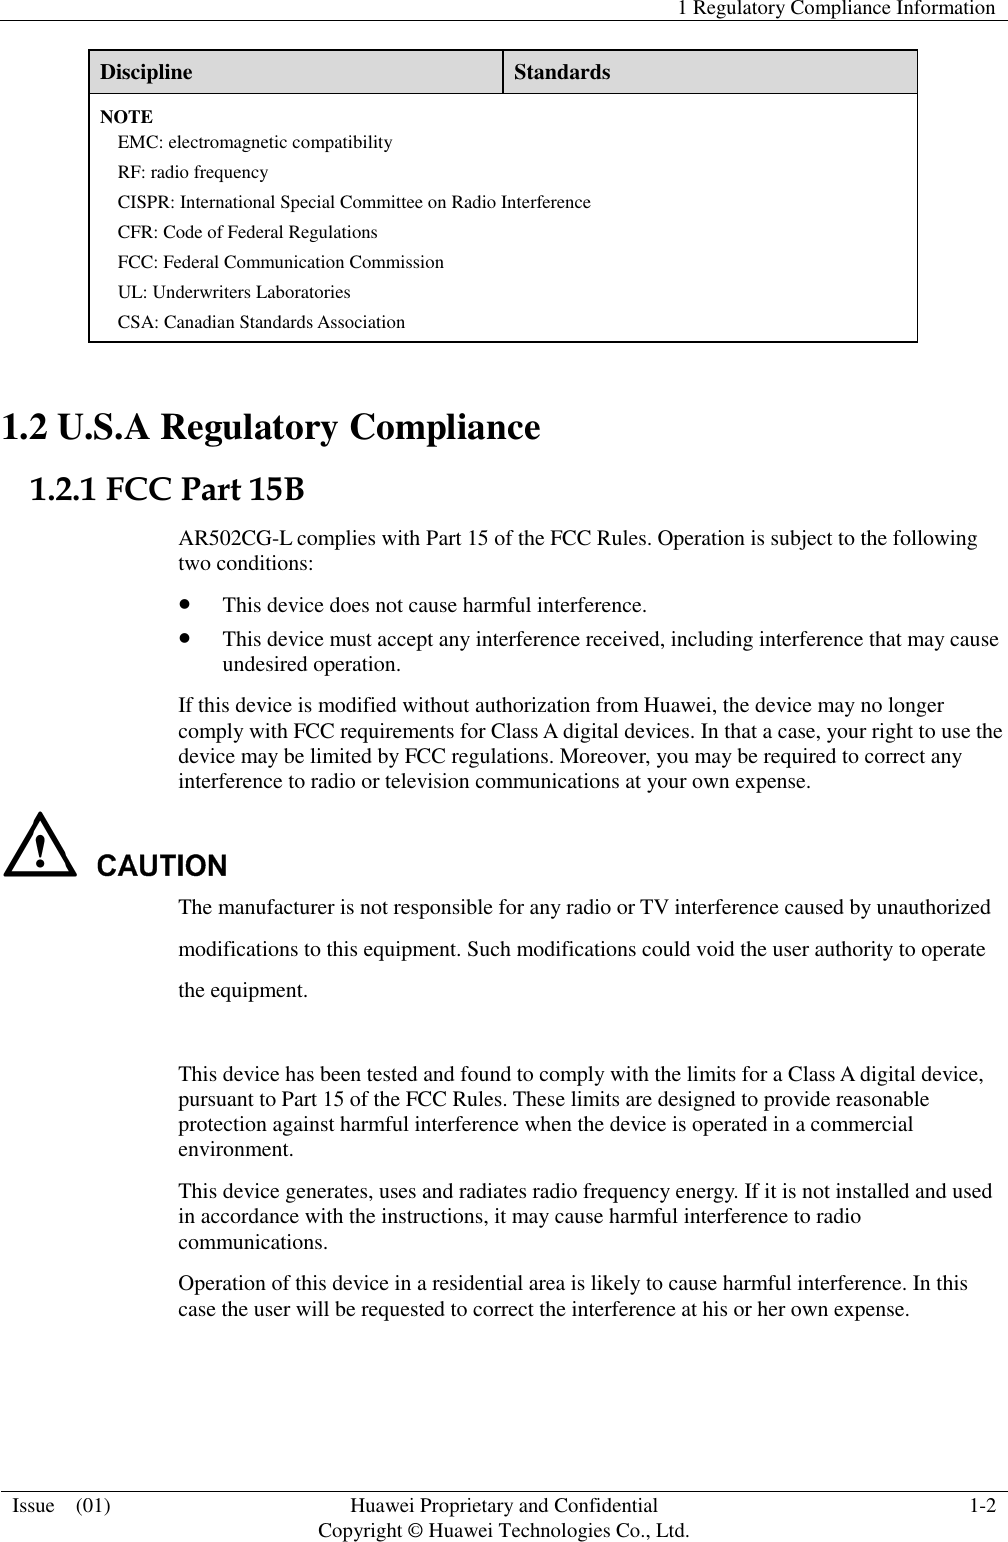   1 Regulatory Compliance Information  Issue    (01)  Huawei Proprietary and Confidential                                     Copyright © Huawei Technologies Co., Ltd.  1-2  Discipline  Standards NOTE EMC: electromagnetic compatibility RF: radio frequency CISPR: International Special Committee on Radio Interference CFR: Code of Federal Regulations FCC: Federal Communication Commission UL: Underwriters Laboratories CSA: Canadian Standards Association 1.2 U.S.A Regulatory Compliance 1.2.1 FCC Part 15B AR502CG-L complies with Part 15 of the FCC Rules. Operation is subject to the following two conditions:  This device does not cause harmful interference.  This device must accept any interference received, including interference that may cause undesired operation. If this device is modified without authorization from Huawei, the device may no longer comply with FCC requirements for Class A digital devices. In that a case, your right to use thedevice may be limited by FCC regulations. Moreover, you may be required to correct any interference to radio or television communications at your own expense.  The manufacturer is not responsible for any radio or TV interference caused by unauthorized modifications to this equipment. Such modifications could void the user authority to operate the equipment.  This device has been tested and found to comply with the limits for a Class A digital device,pursuant to Part 15 of the FCC Rules. These limits are designed to provide reasonable protection against harmful interference when the device is operated in a commercial environment. This device generates, uses and radiates radio frequency energy. If it is not installed and used in accordance with the instructions, it may cause harmful interference to radio communications. Operation of this device in a residential area is likely to cause harmful interference. In this case the user will be requested to correct the interference at his or her own expense. 